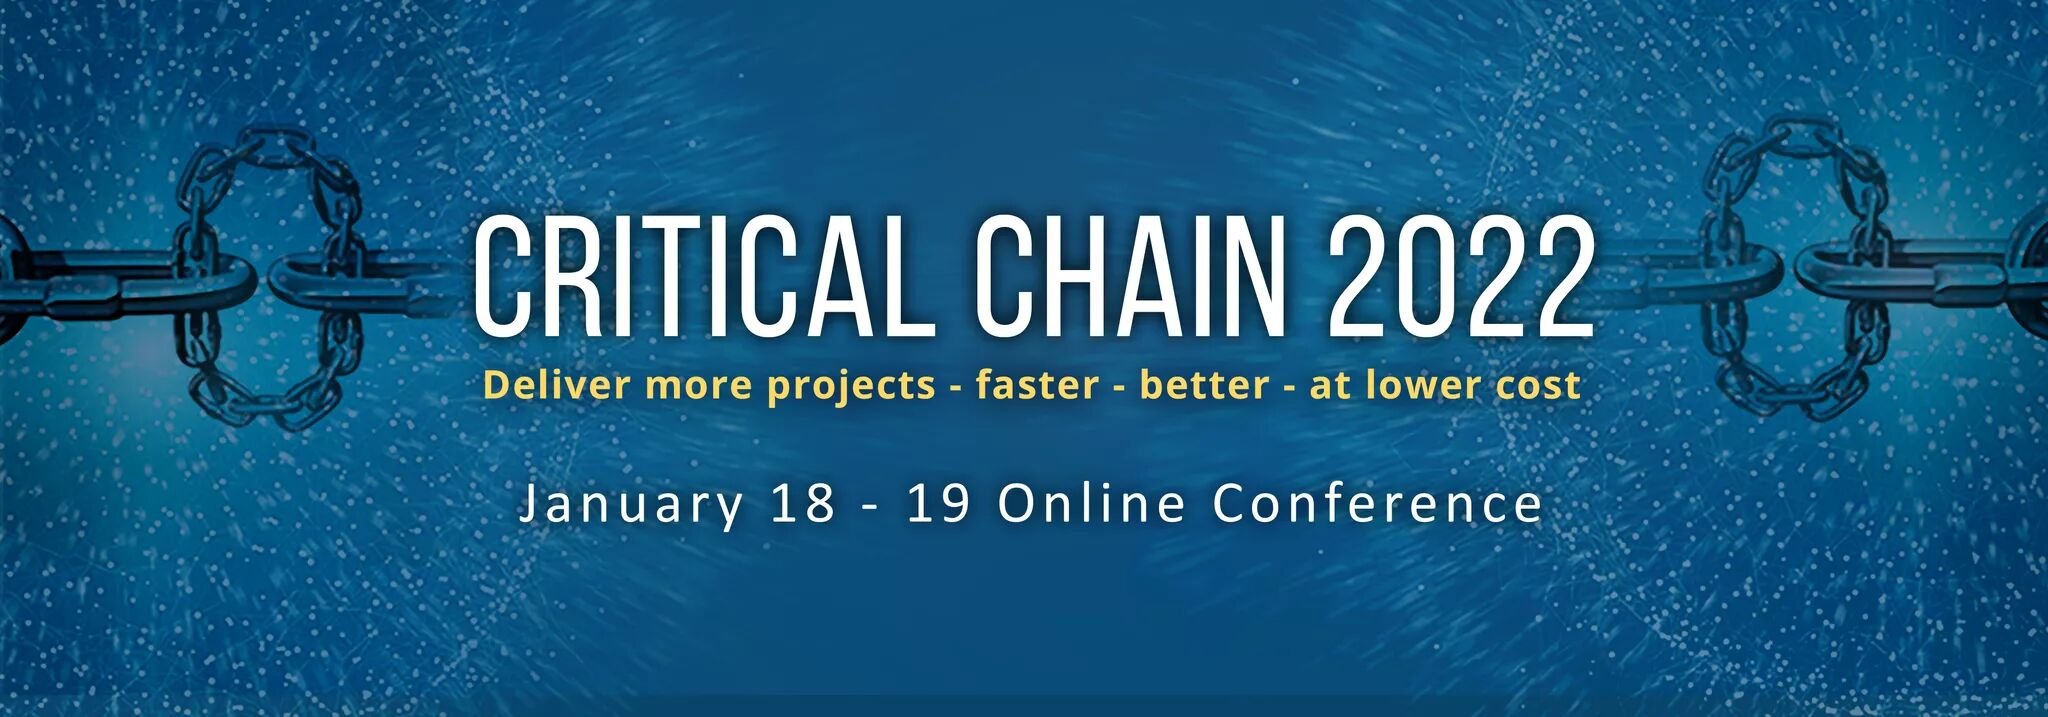 Conference Critical Chain 2022